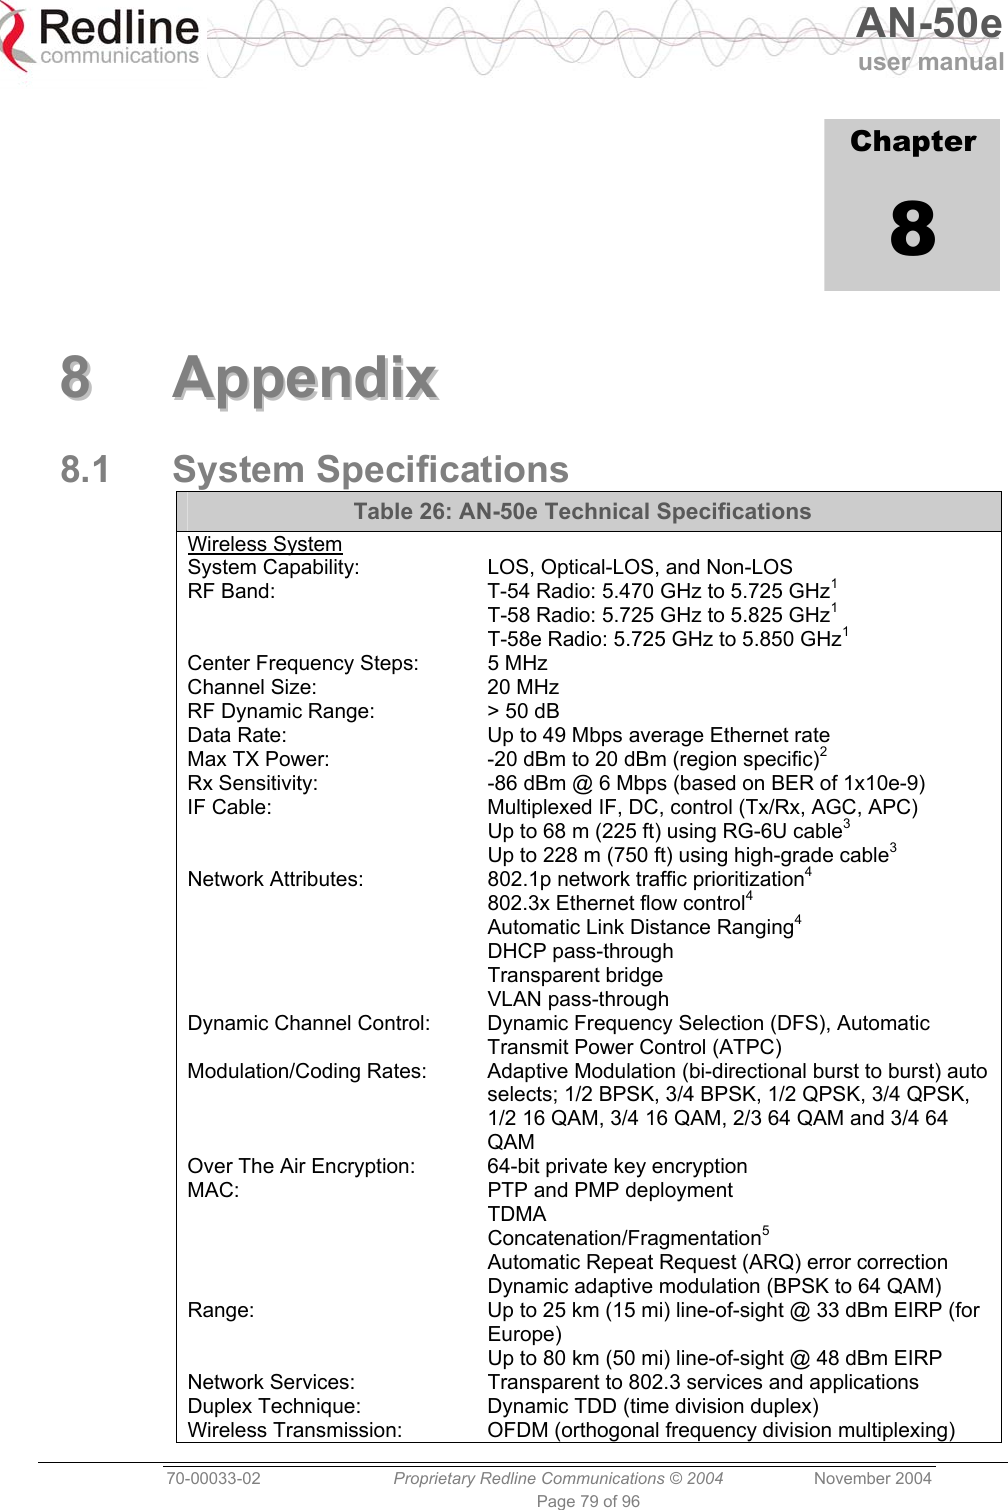   AN-50e user manual  70-00033-02  Proprietary Redline Communications © 2004 November 2004 Page 79 of 96             Chapter 8  88  AAppppeennddiixx  8.1 System Specifications Table 26: AN-50e Technical Specifications Wireless System System Capability:  LOS, Optical-LOS, and Non-LOS RF Band:  T-54 Radio: 5.470 GHz to 5.725 GHz1   T-58 Radio: 5.725 GHz to 5.825 GHz1   T-58e Radio: 5.725 GHz to 5.850 GHz1 Center Frequency Steps:  5 MHz Channel Size:  20 MHz RF Dynamic Range:  &gt; 50 dB Data Rate:  Up to 49 Mbps average Ethernet rate Max TX Power:  -20 dBm to 20 dBm (region specific)2 Rx Sensitivity:  -86 dBm @ 6 Mbps (based on BER of 1x10e-9) IF Cable:  Multiplexed IF, DC, control (Tx/Rx, AGC, APC)   Up to 68 m (225 ft) using RG-6U cable3   Up to 228 m (750 ft) using high-grade cable3 Network Attributes:  802.1p network traffic prioritization4   802.3x Ethernet flow control4   Automatic Link Distance Ranging4  DHCP pass-through  Transparent bridge  VLAN pass-through Dynamic Channel Control:  Dynamic Frequency Selection (DFS), Automatic Transmit Power Control (ATPC) Modulation/Coding Rates:  Adaptive Modulation (bi-directional burst to burst) auto selects; 1/2 BPSK, 3/4 BPSK, 1/2 QPSK, 3/4 QPSK, 1/2 16 QAM, 3/4 16 QAM, 2/3 64 QAM and 3/4 64 QAM Over The Air Encryption:  64-bit private key encryption MAC:  PTP and PMP deployment  TDMA  Concatenation/Fragmentation5   Automatic Repeat Request (ARQ) error correction   Dynamic adaptive modulation (BPSK to 64 QAM) Range:  Up to 25 km (15 mi) line-of-sight @ 33 dBm EIRP (for Europe)   Up to 80 km (50 mi) line-of-sight @ 48 dBm EIRP Network Services:  Transparent to 802.3 services and applications Duplex Technique:  Dynamic TDD (time division duplex) Wireless Transmission:  OFDM (orthogonal frequency division multiplexing) 